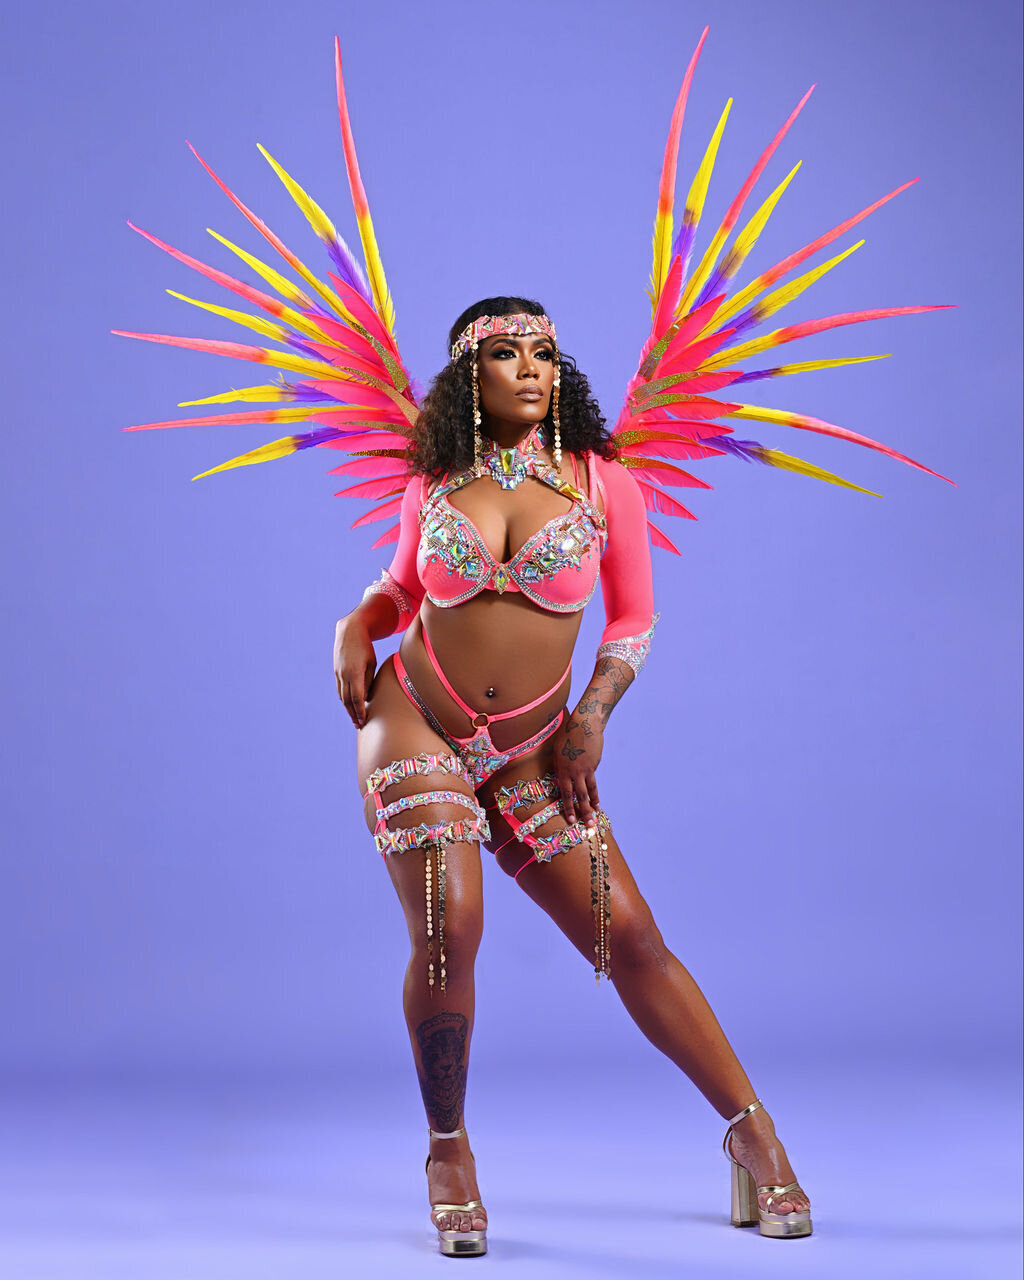 Register to play mas at the 2023 Toronto Caribbean Carnival with Sunlime Mas